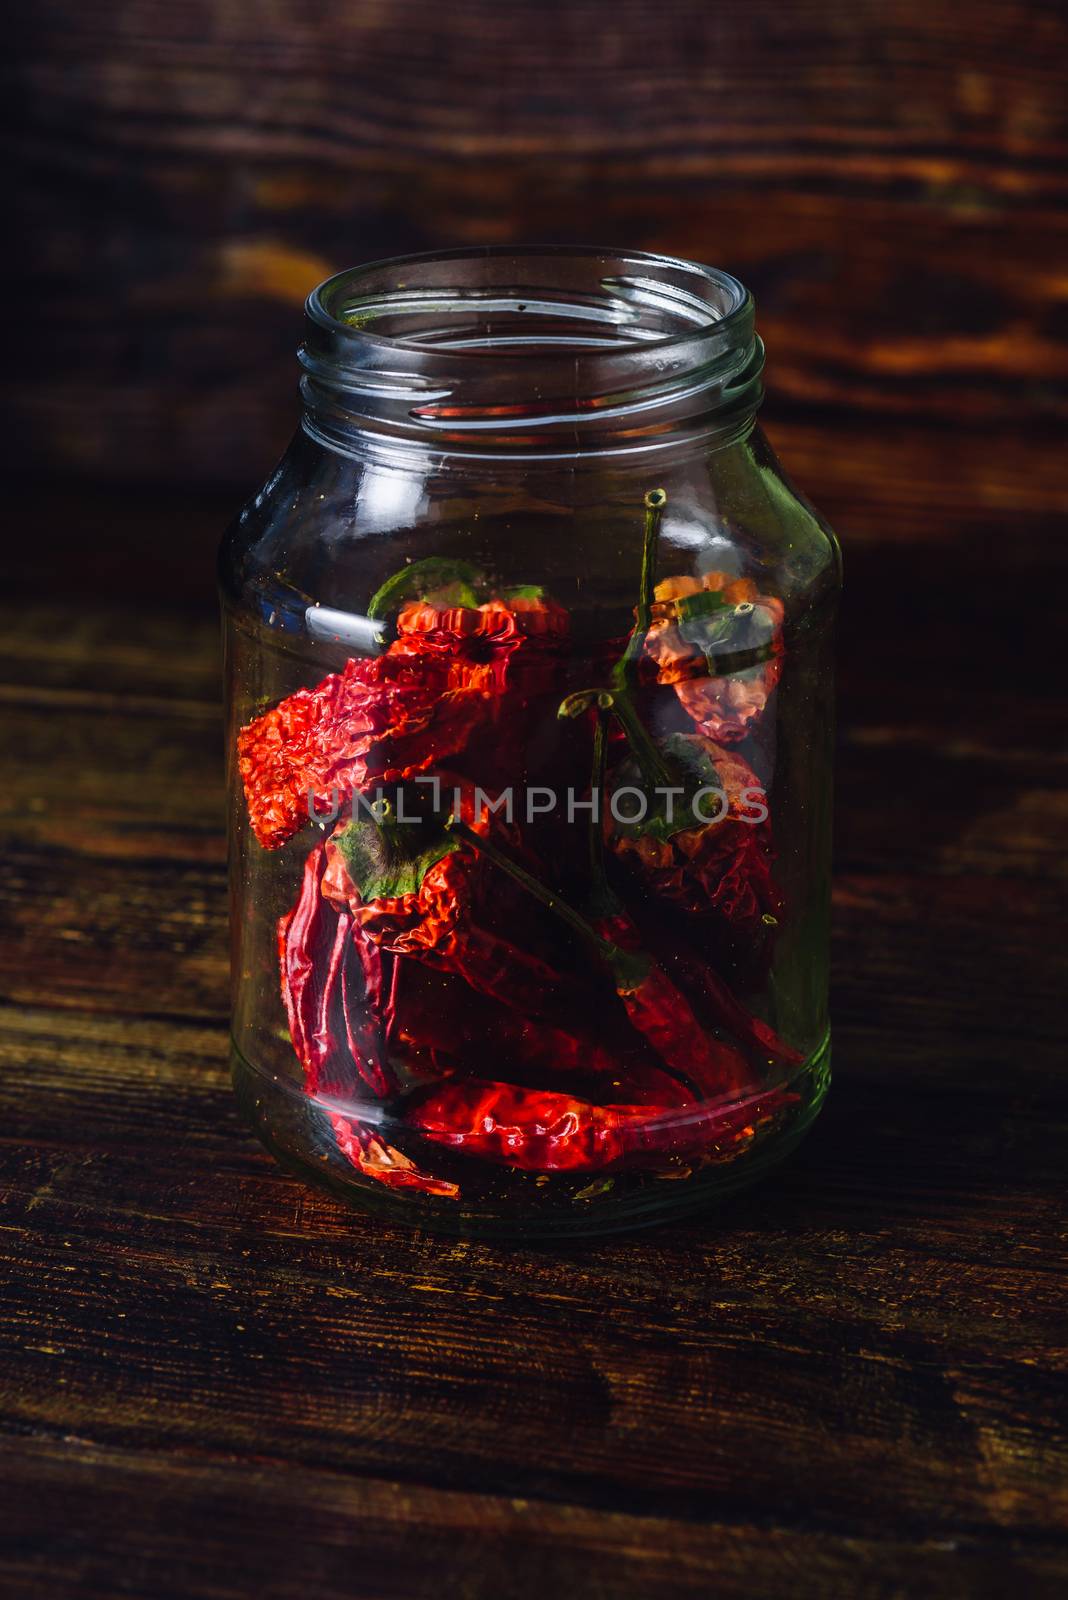 Dry Red Chili Peppers inside the Jar on Wooden Rustic Background.